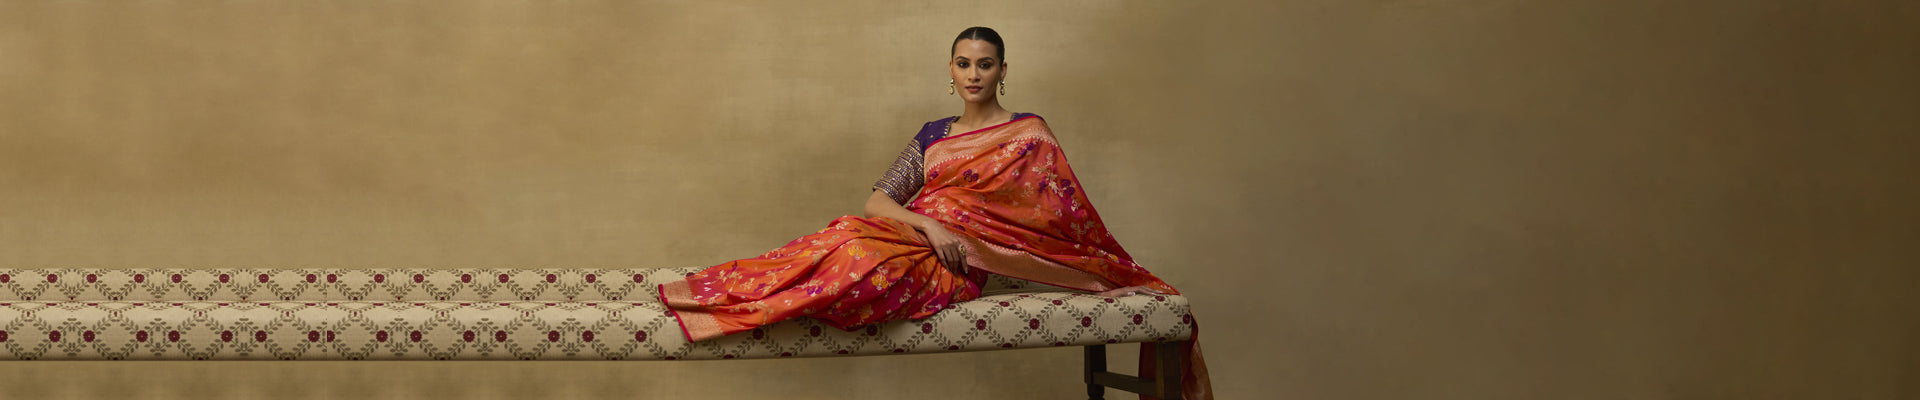 Handwoven_Banarasi_Sarees_:_Tapestry_of_Tradition_and_Luxury_WeaverStory